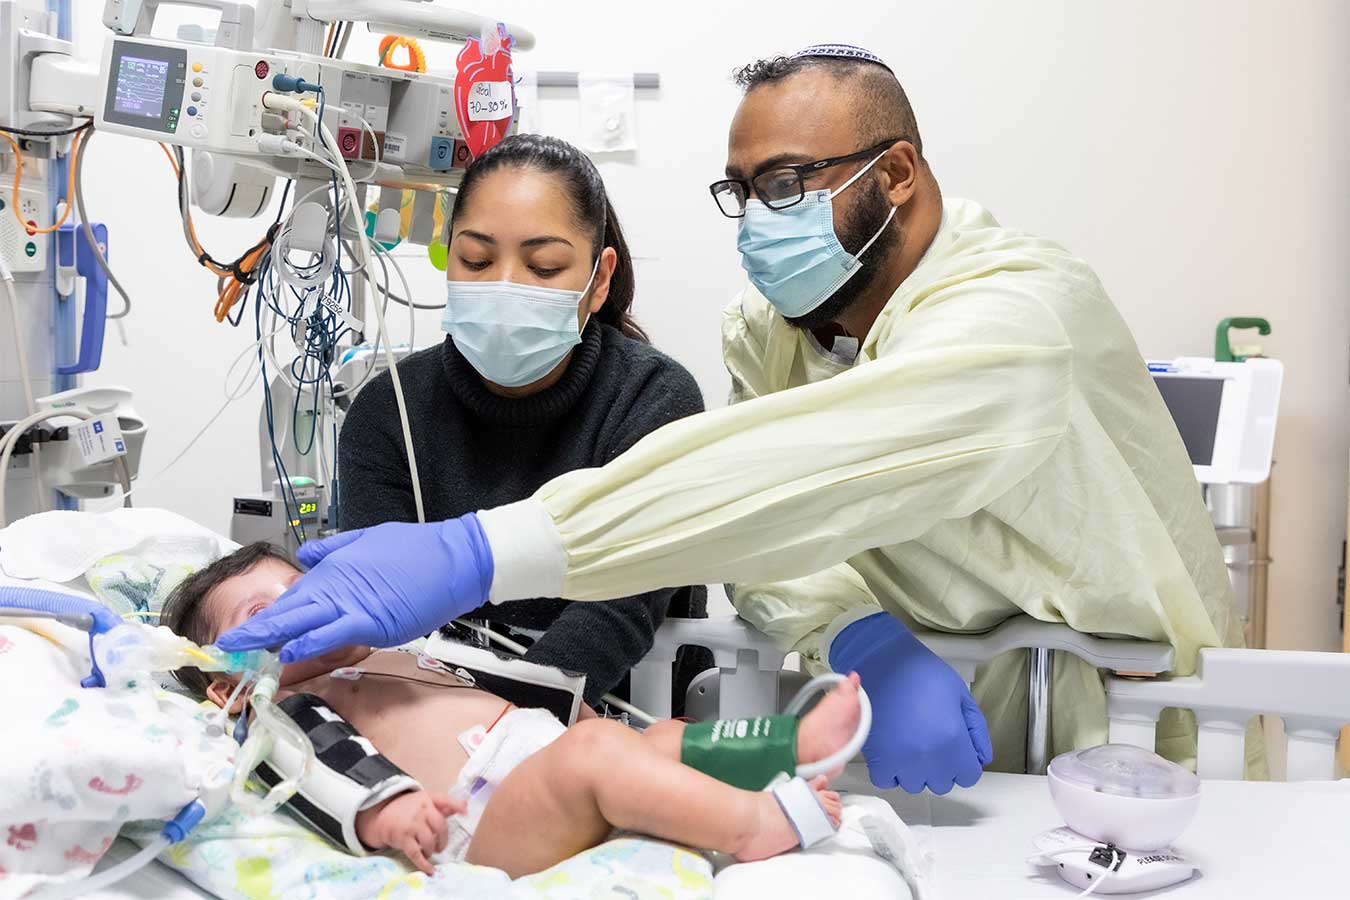 A nurse adjusts the tubing of a toddler in a hospital bed